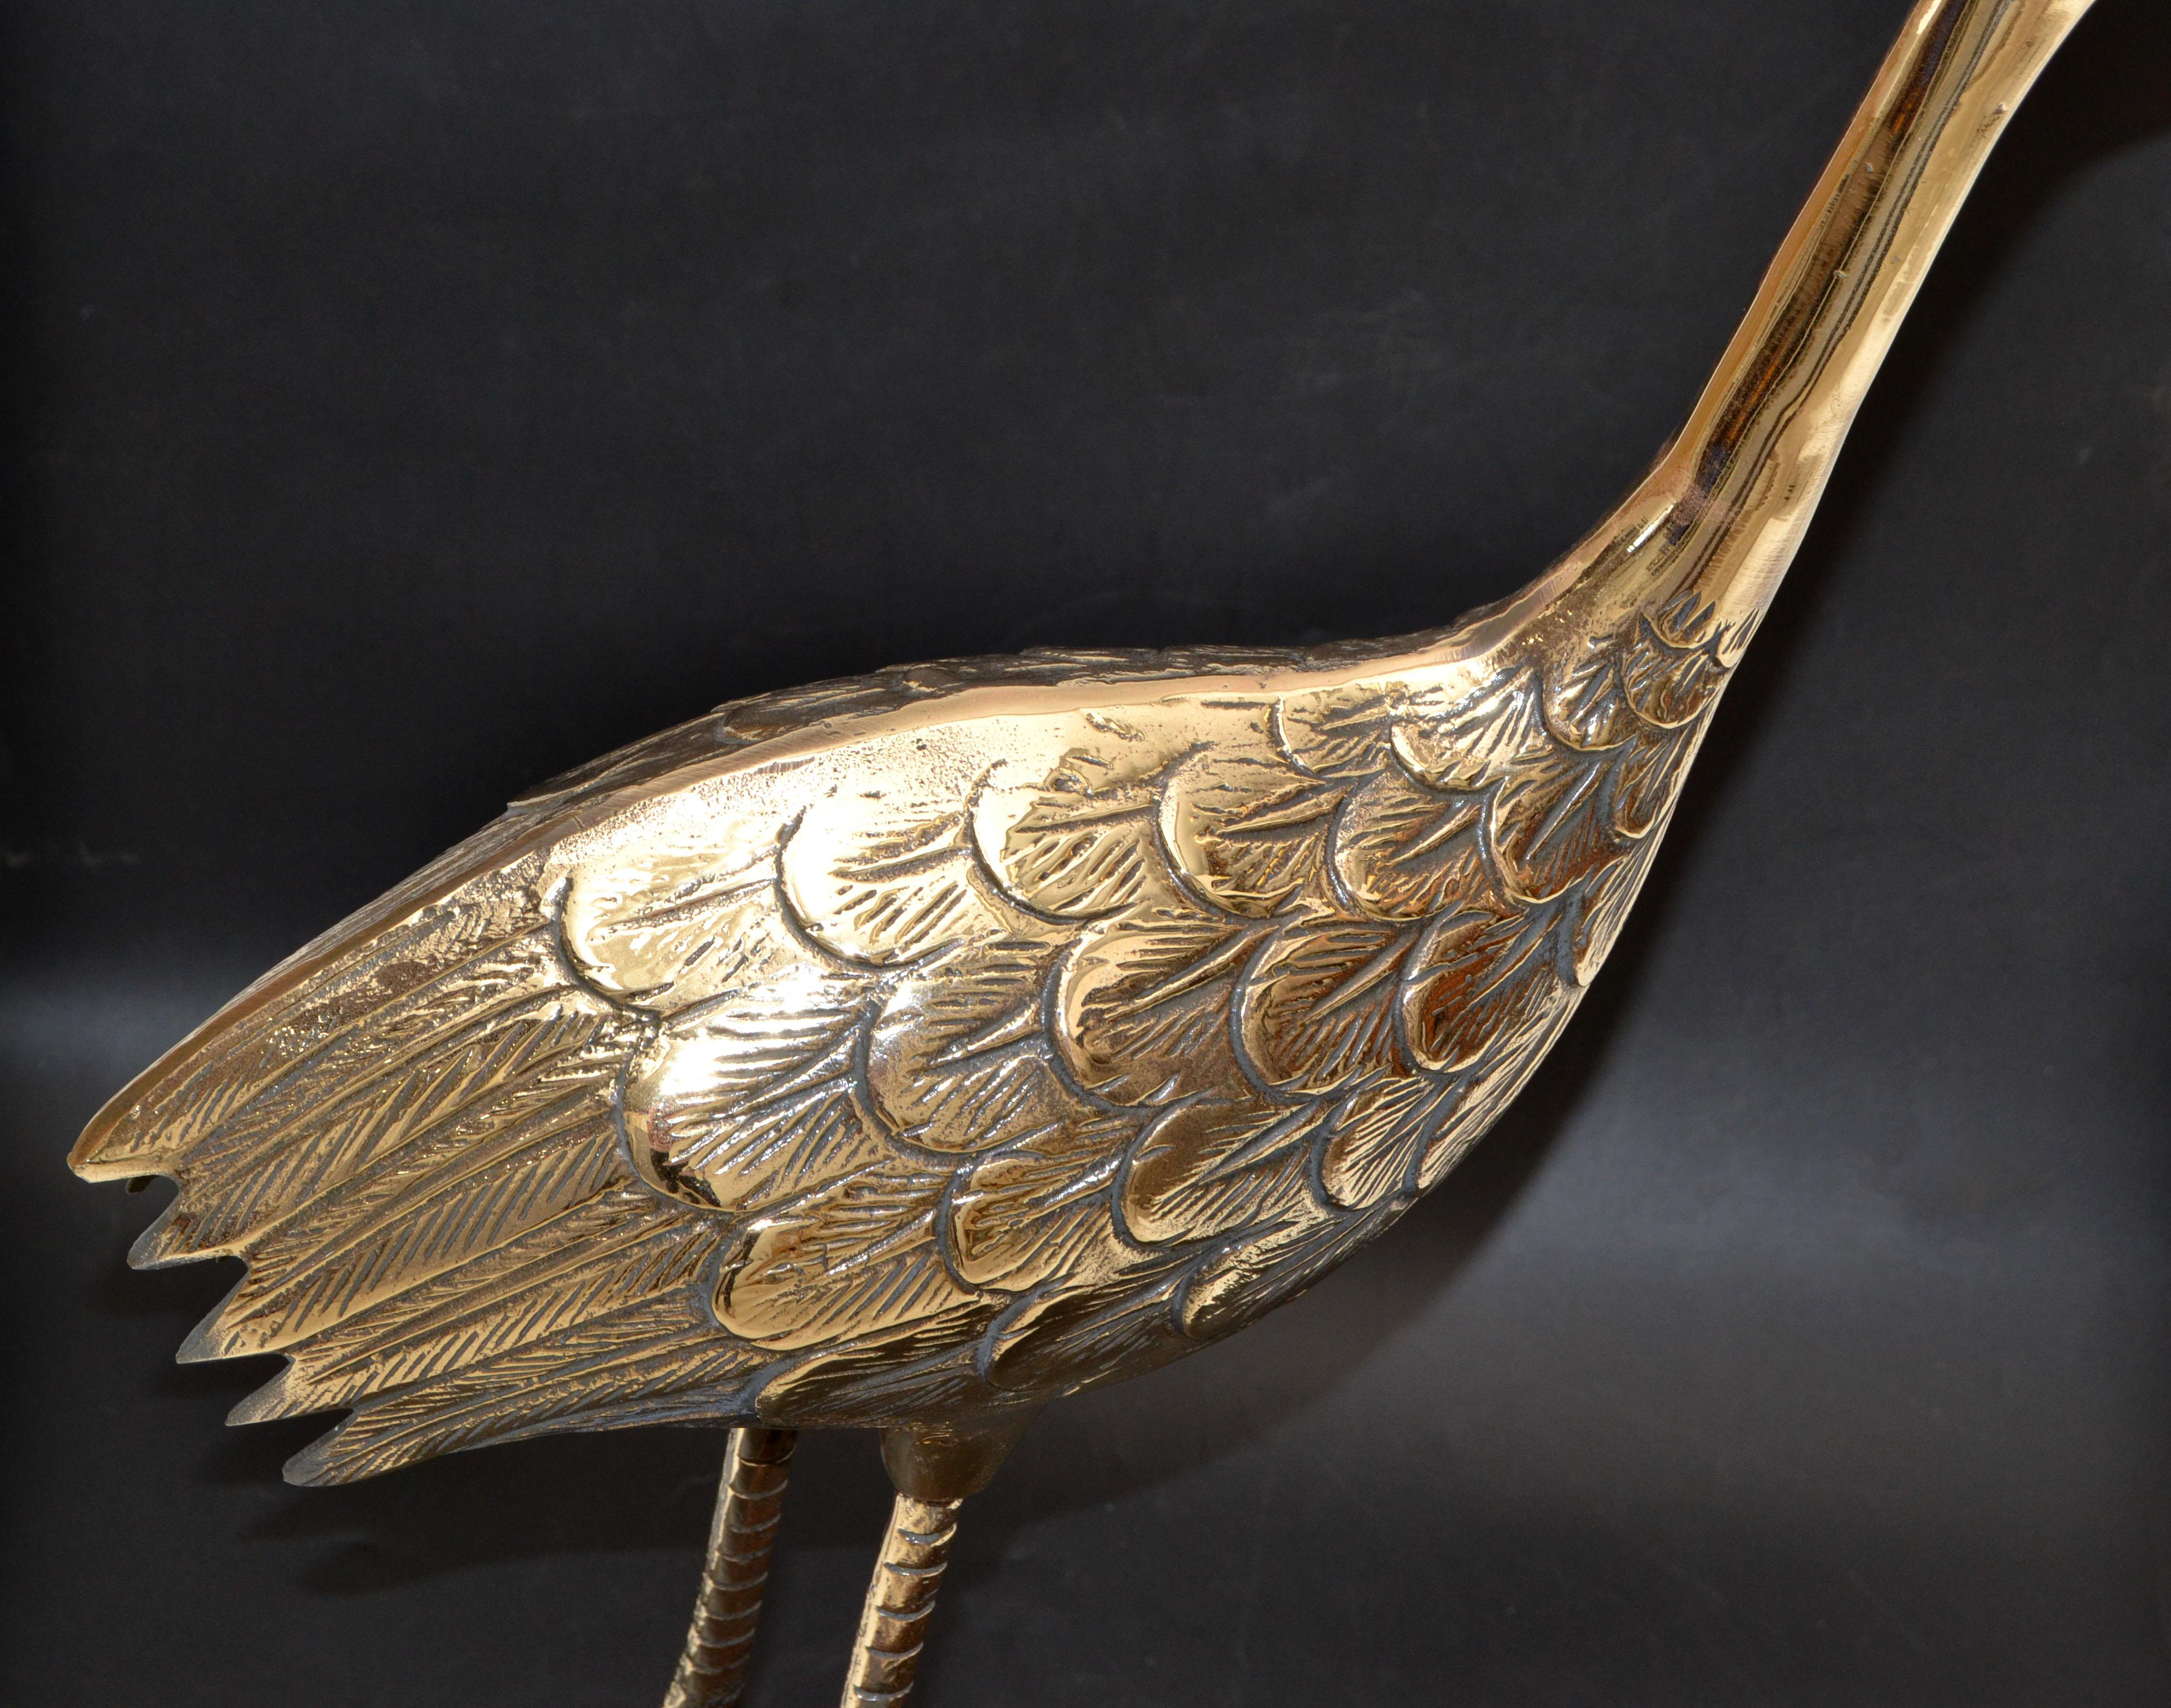 Bronze Crane Life-Size Animal Sculpture Handcrafted Mid-Century Modern, 1970 For Sale 5